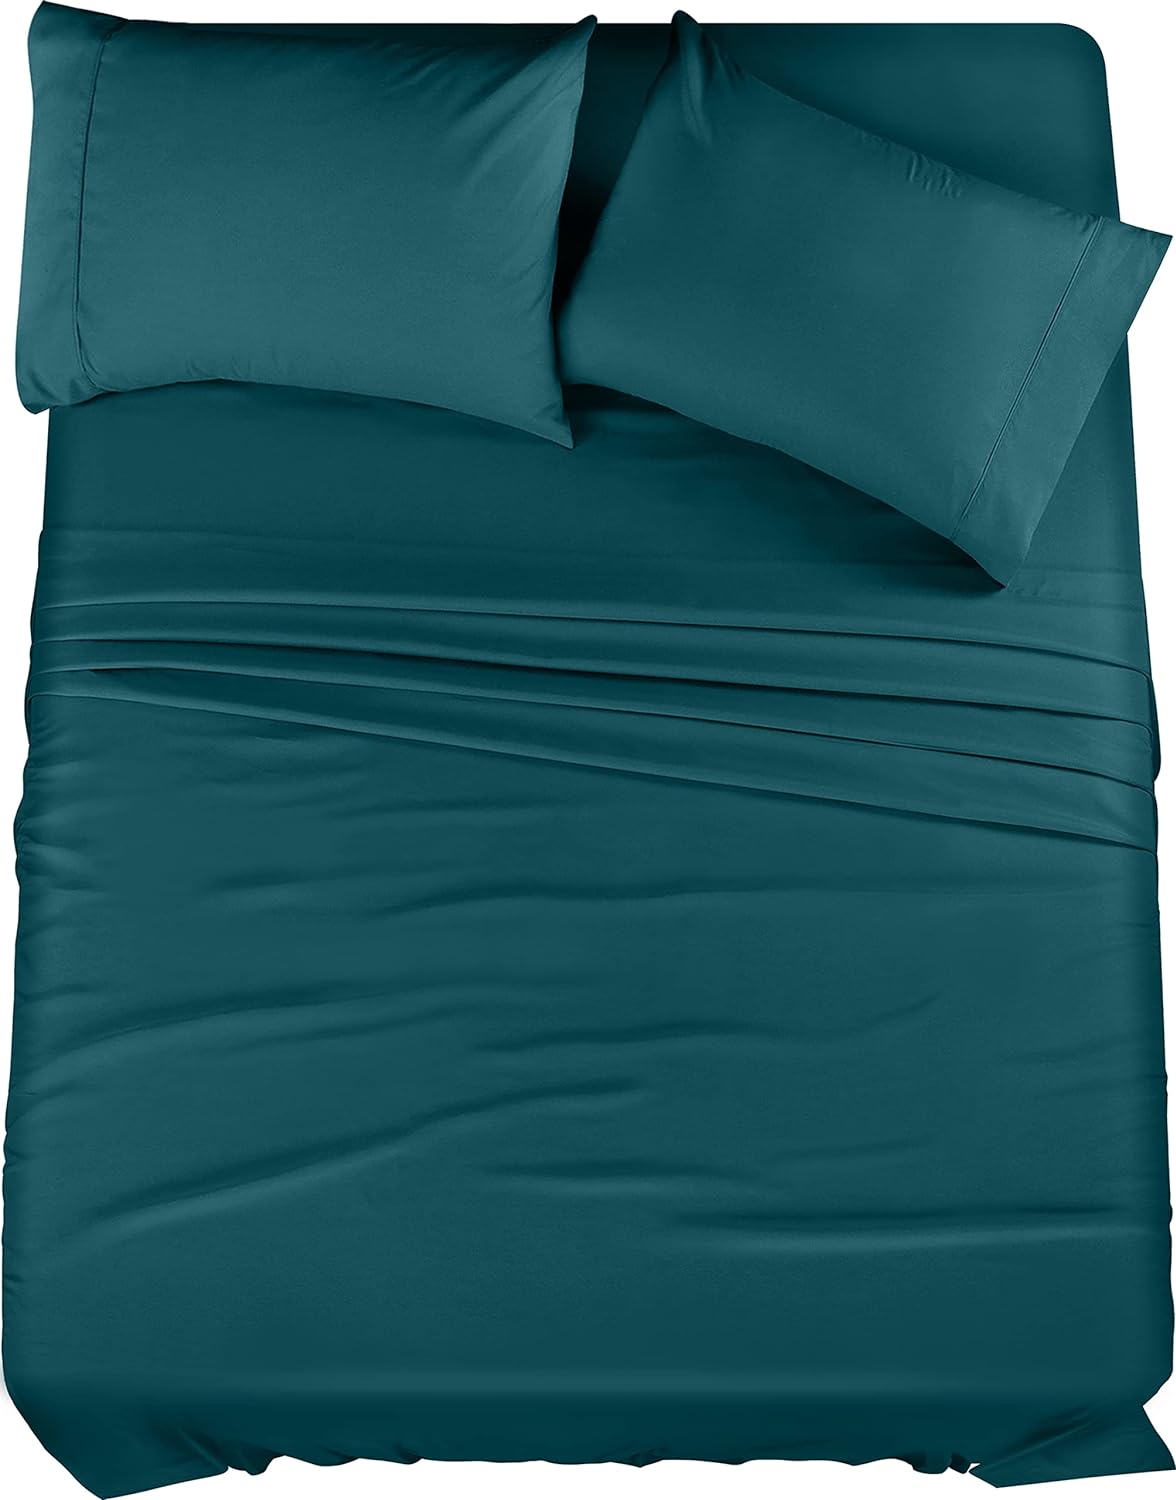 Utopia Bedding Full Bed Sheets Set - 4 Piece Bedding - Brushed Microfiber - Shrinkage and Fade Resistant - Easy Care (Full, Teal)